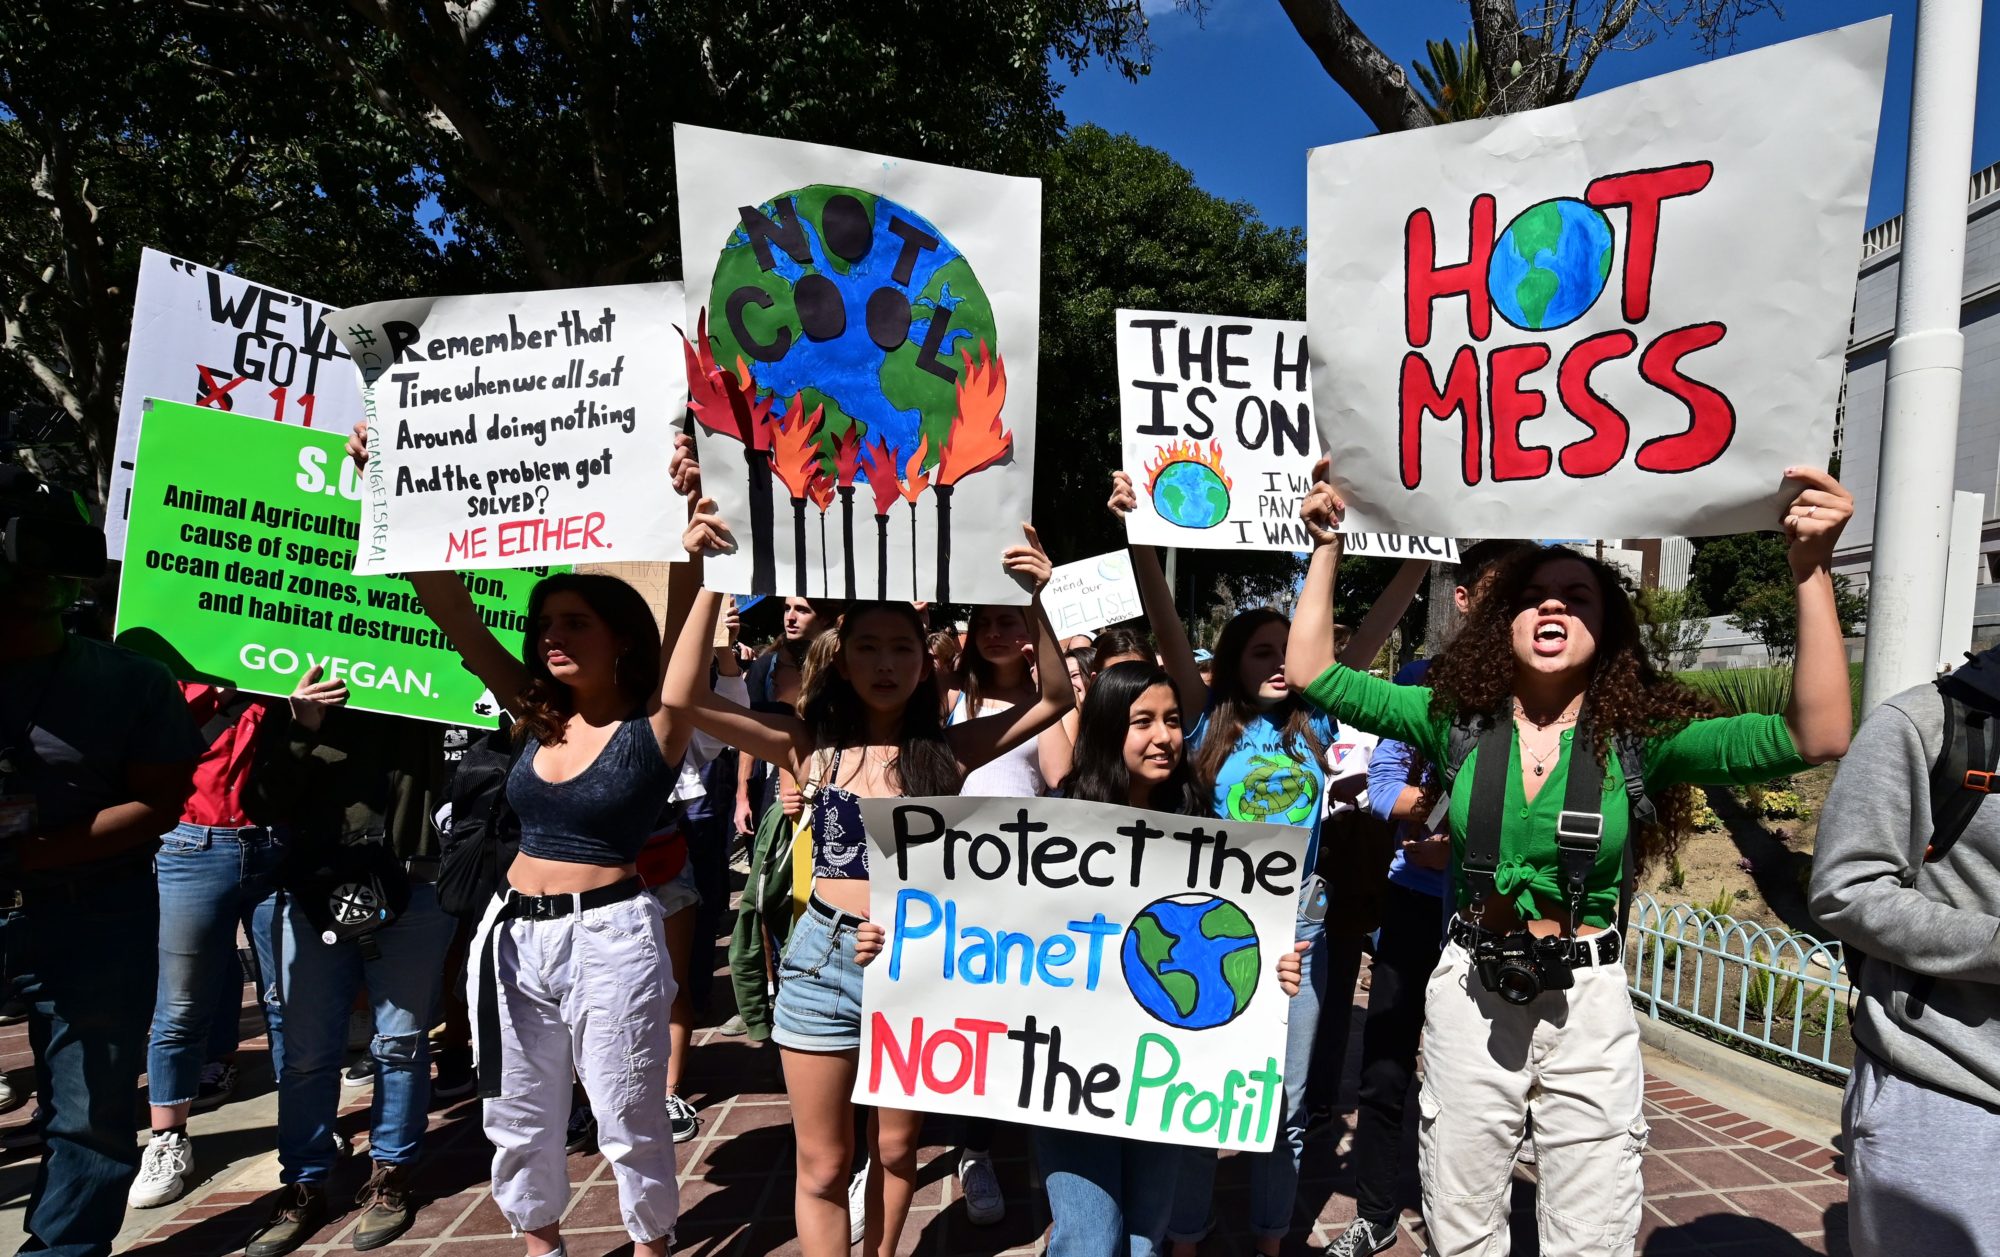 Students forced to advocate for themselves on impact of climate change - The Hechinger Report